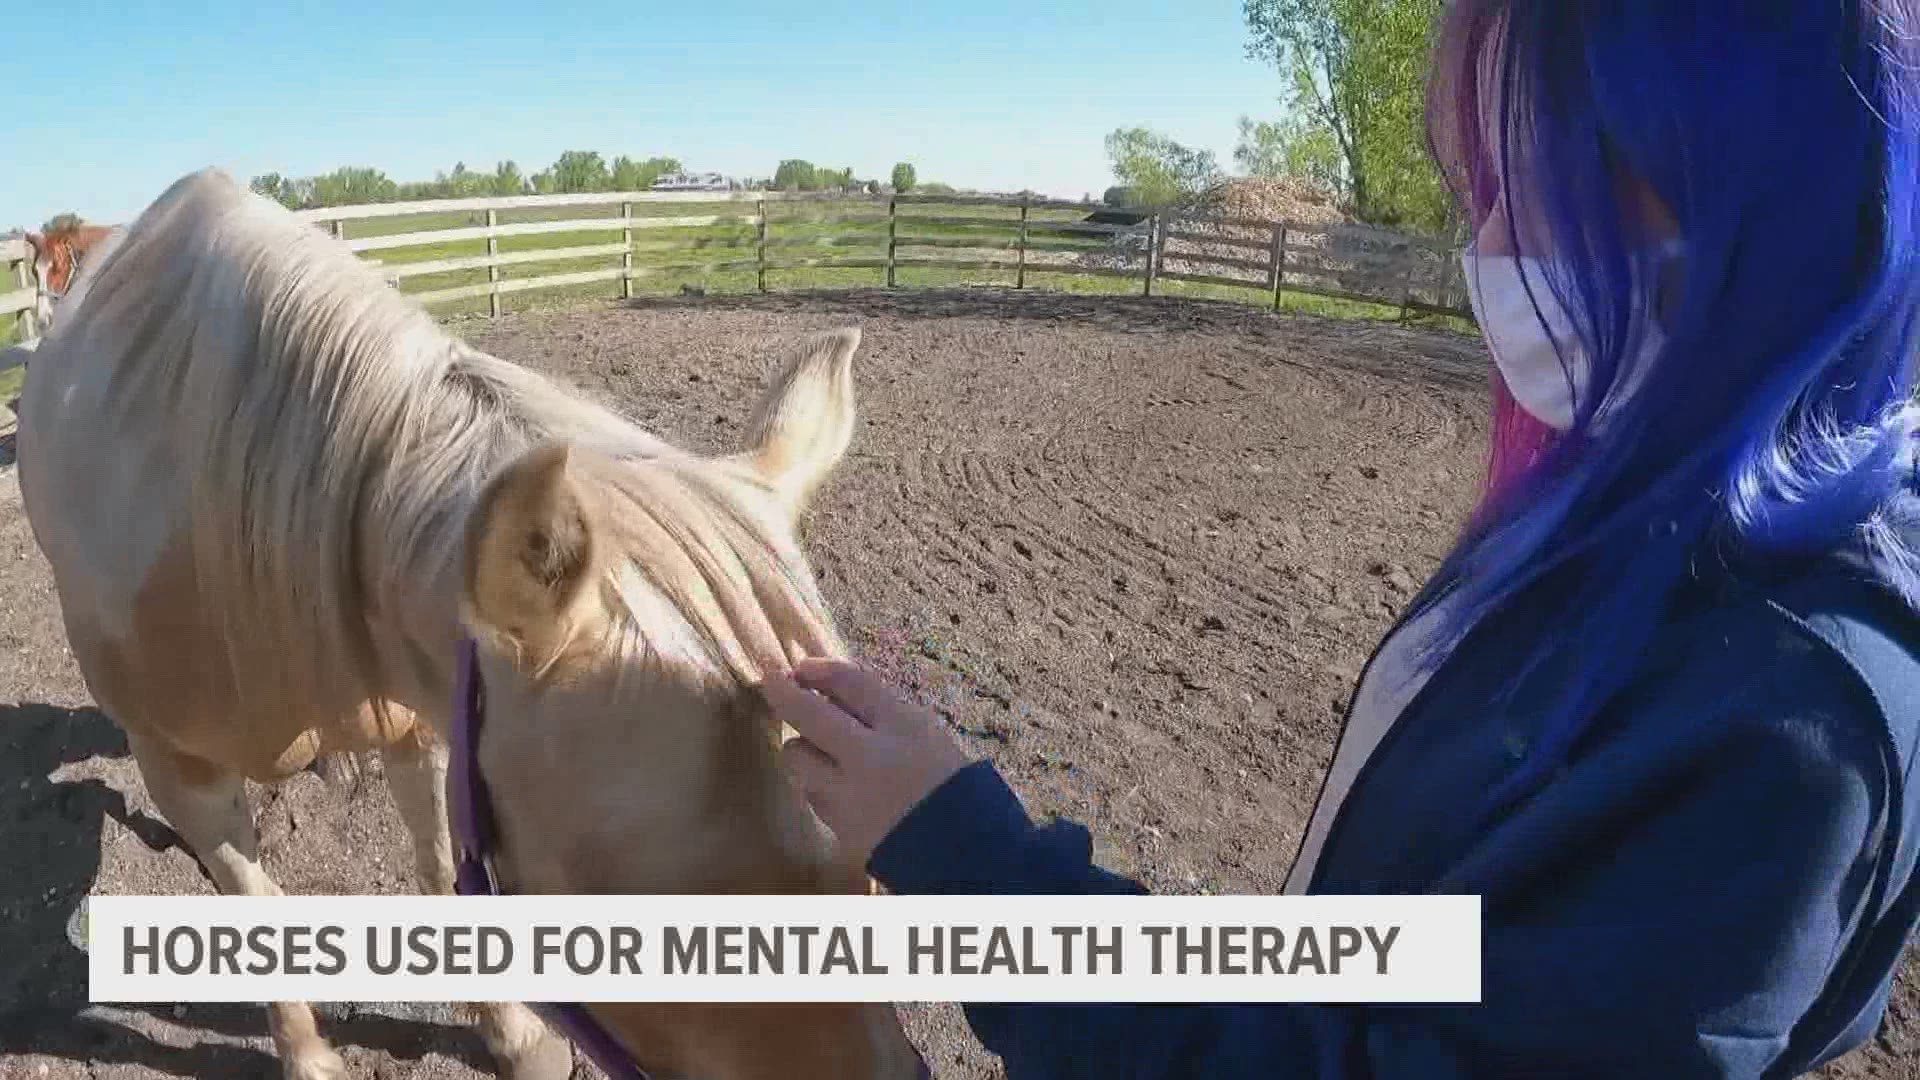 “It’s never too late to seek out mental health," said Danielle Anderson-Jeppesen, owner of Romans Ranch. "It’s never too late.”